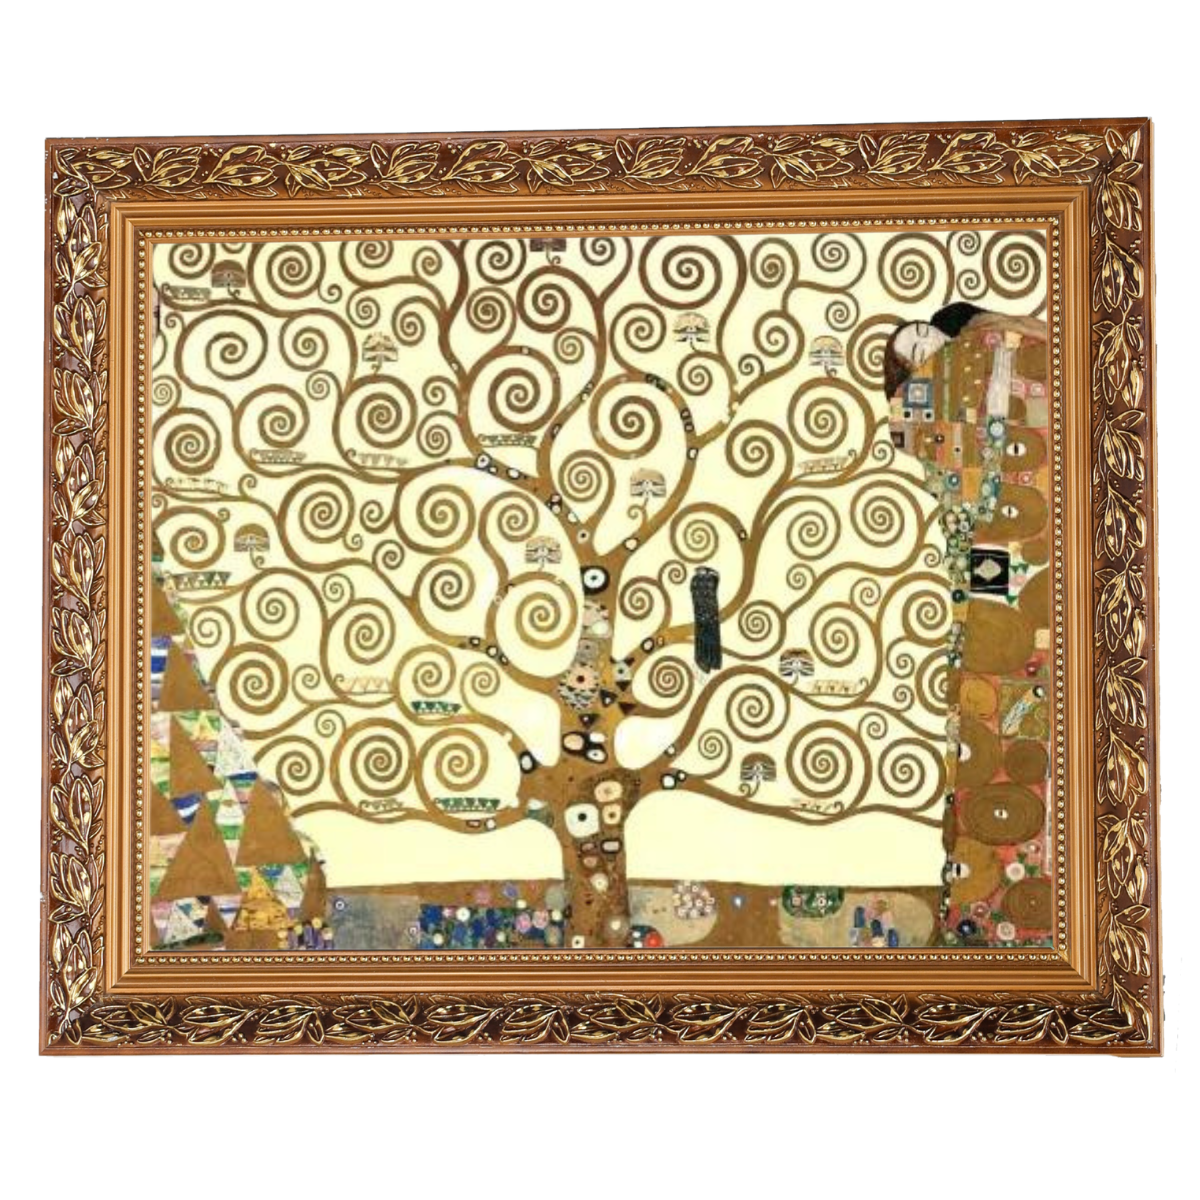 The Tree of Life - Abstracts Wall Art Prints Decor For Living Room